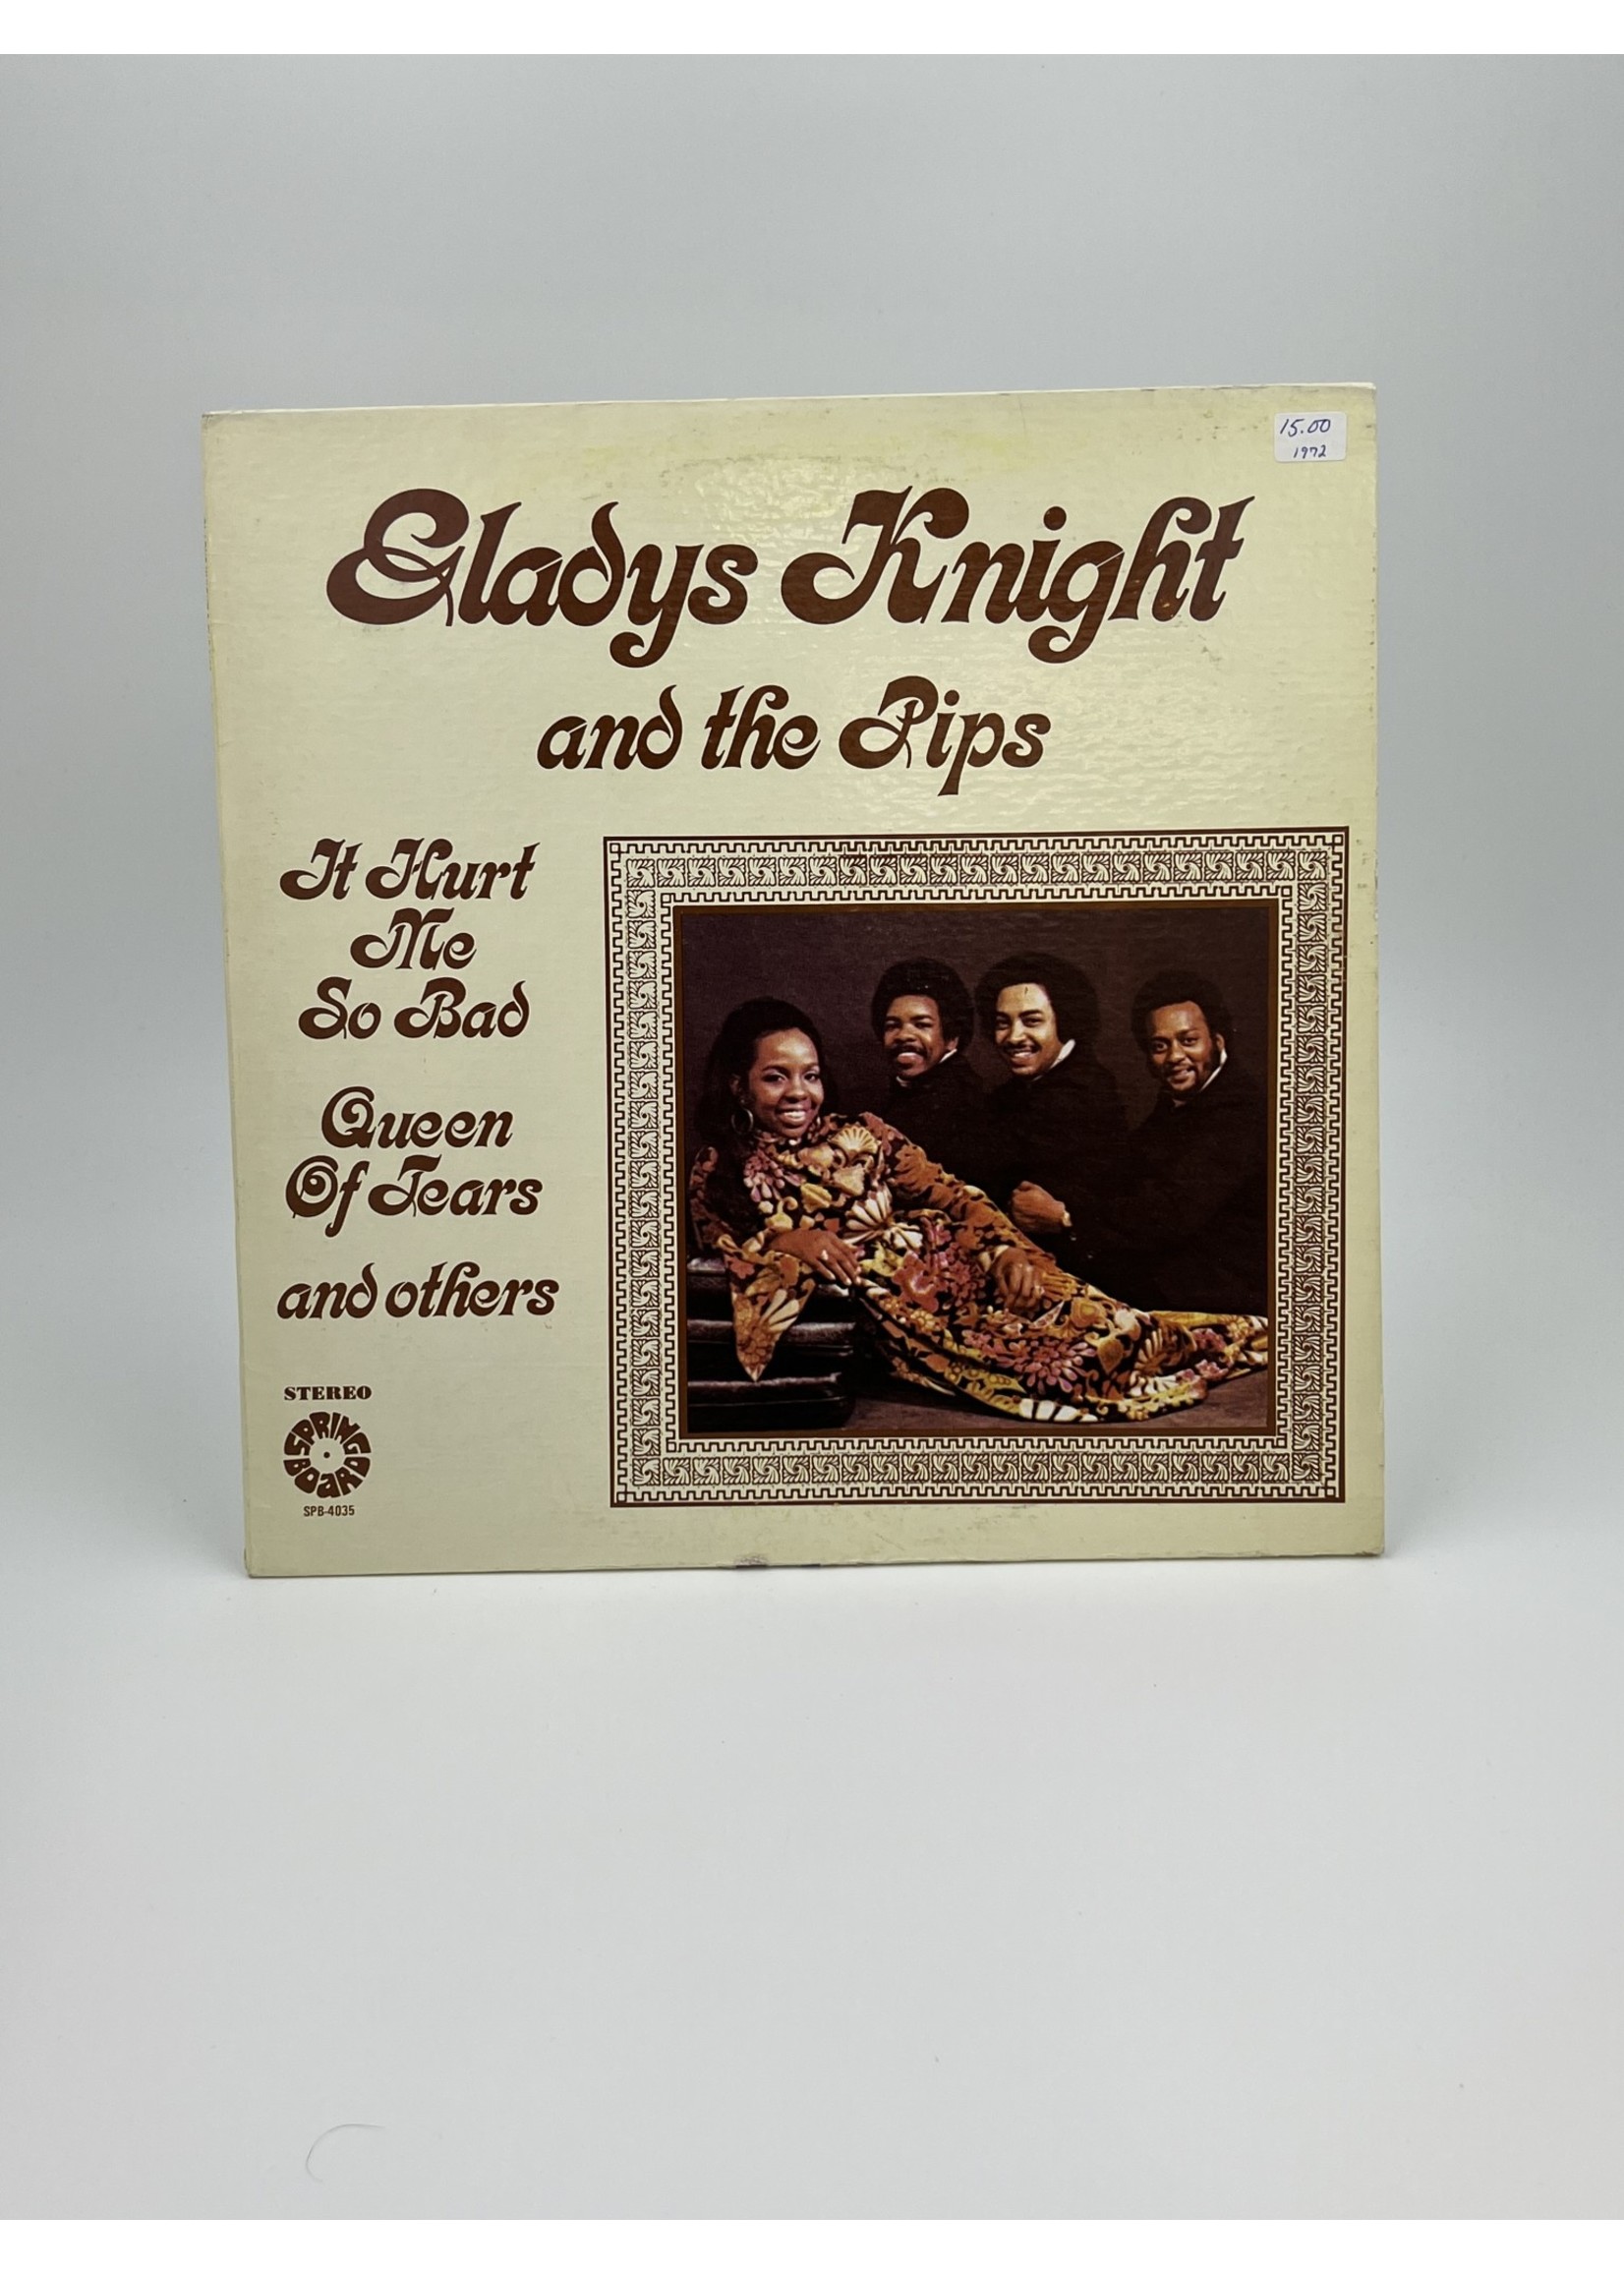 LP Gladys Knight and The Pips Early Hits LP Record